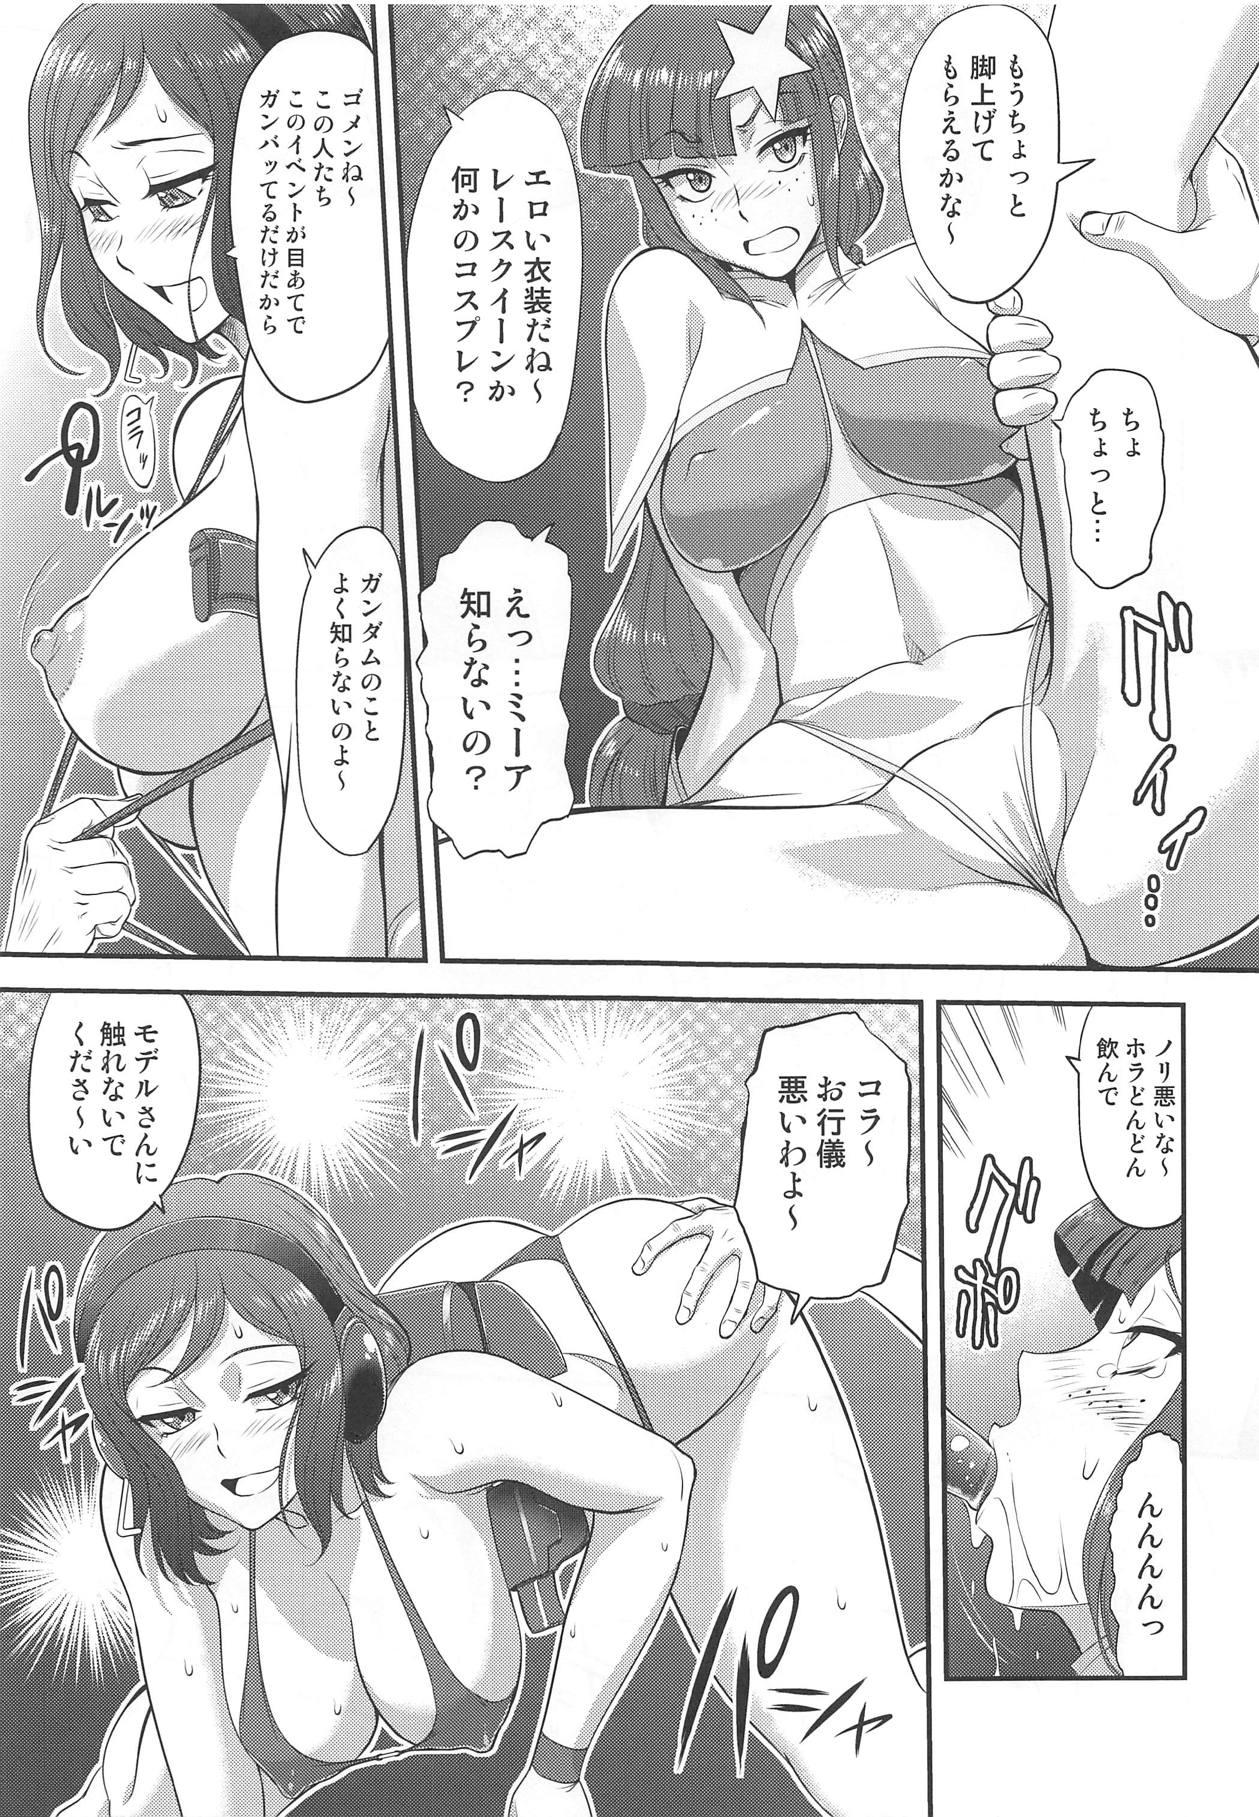 Nasty Free Porn Midnight Modelers - Gundam build fighters Cum Swallow - Page 6